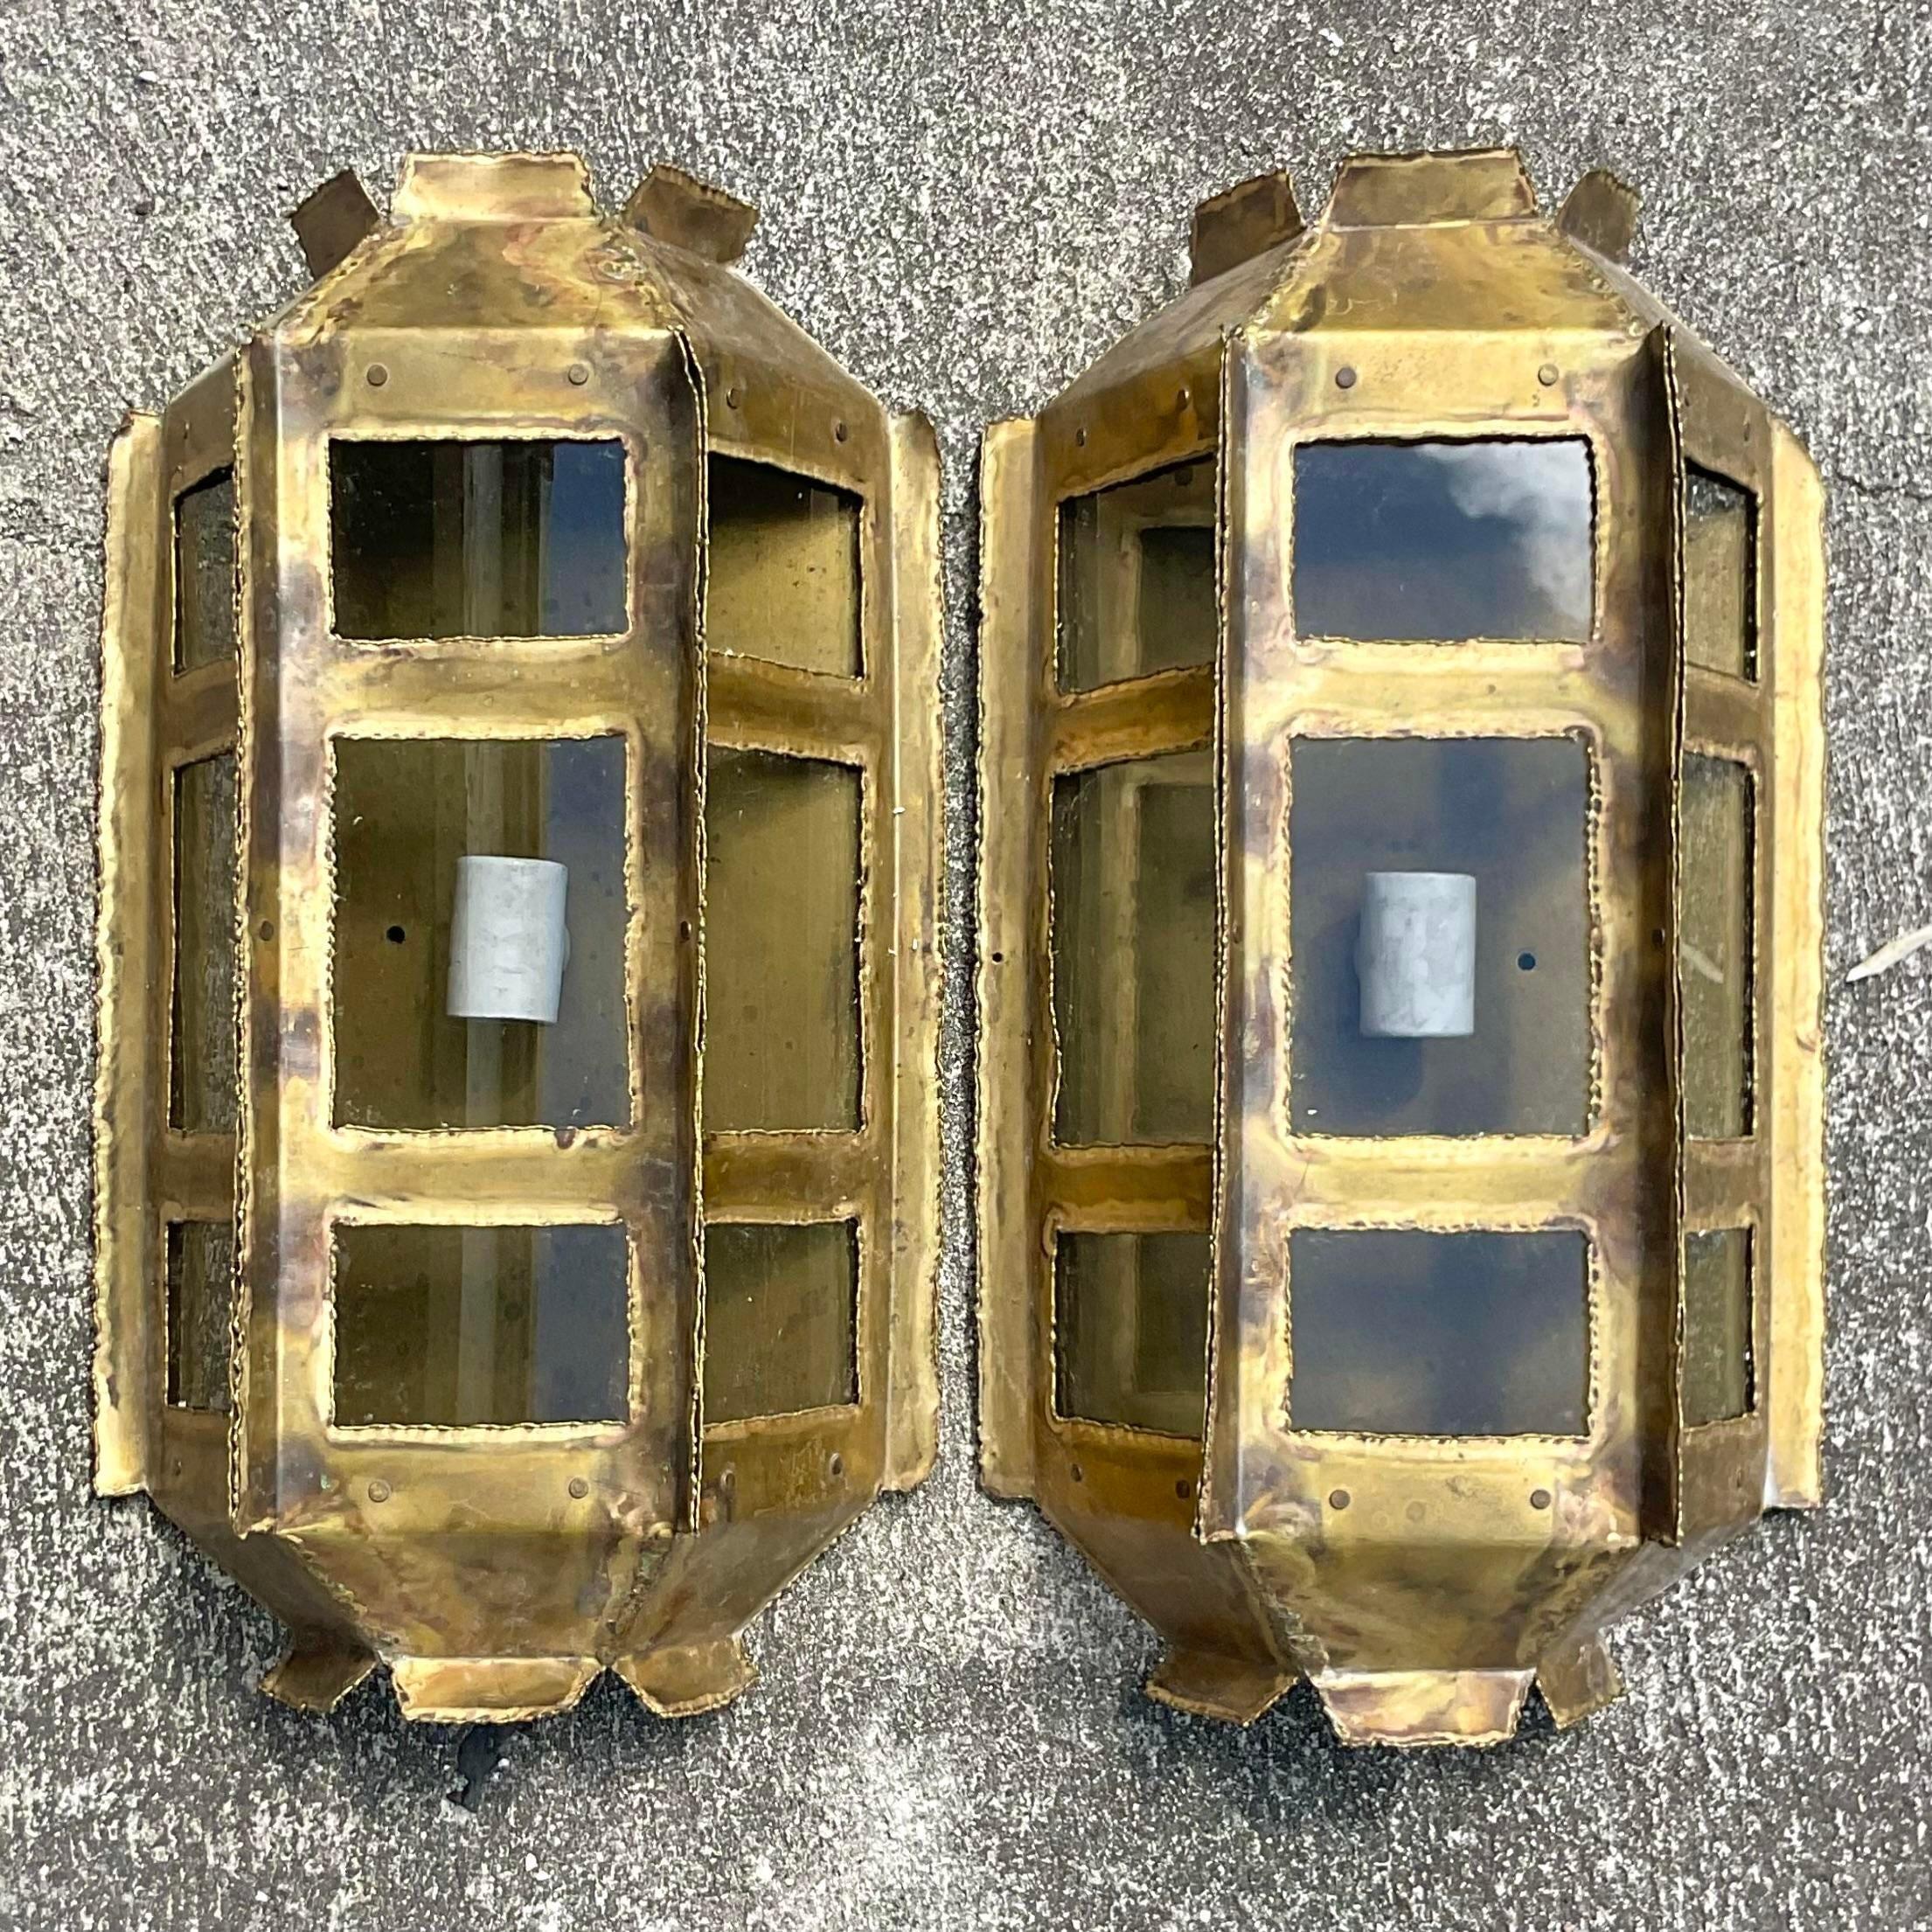 A fantastic pair of vintage MCM wall sconces. Made by the iconic Tom Greene for Feldman. Chic torch cut design with smoked glass panels. Acquired from a Palm Beach estate.